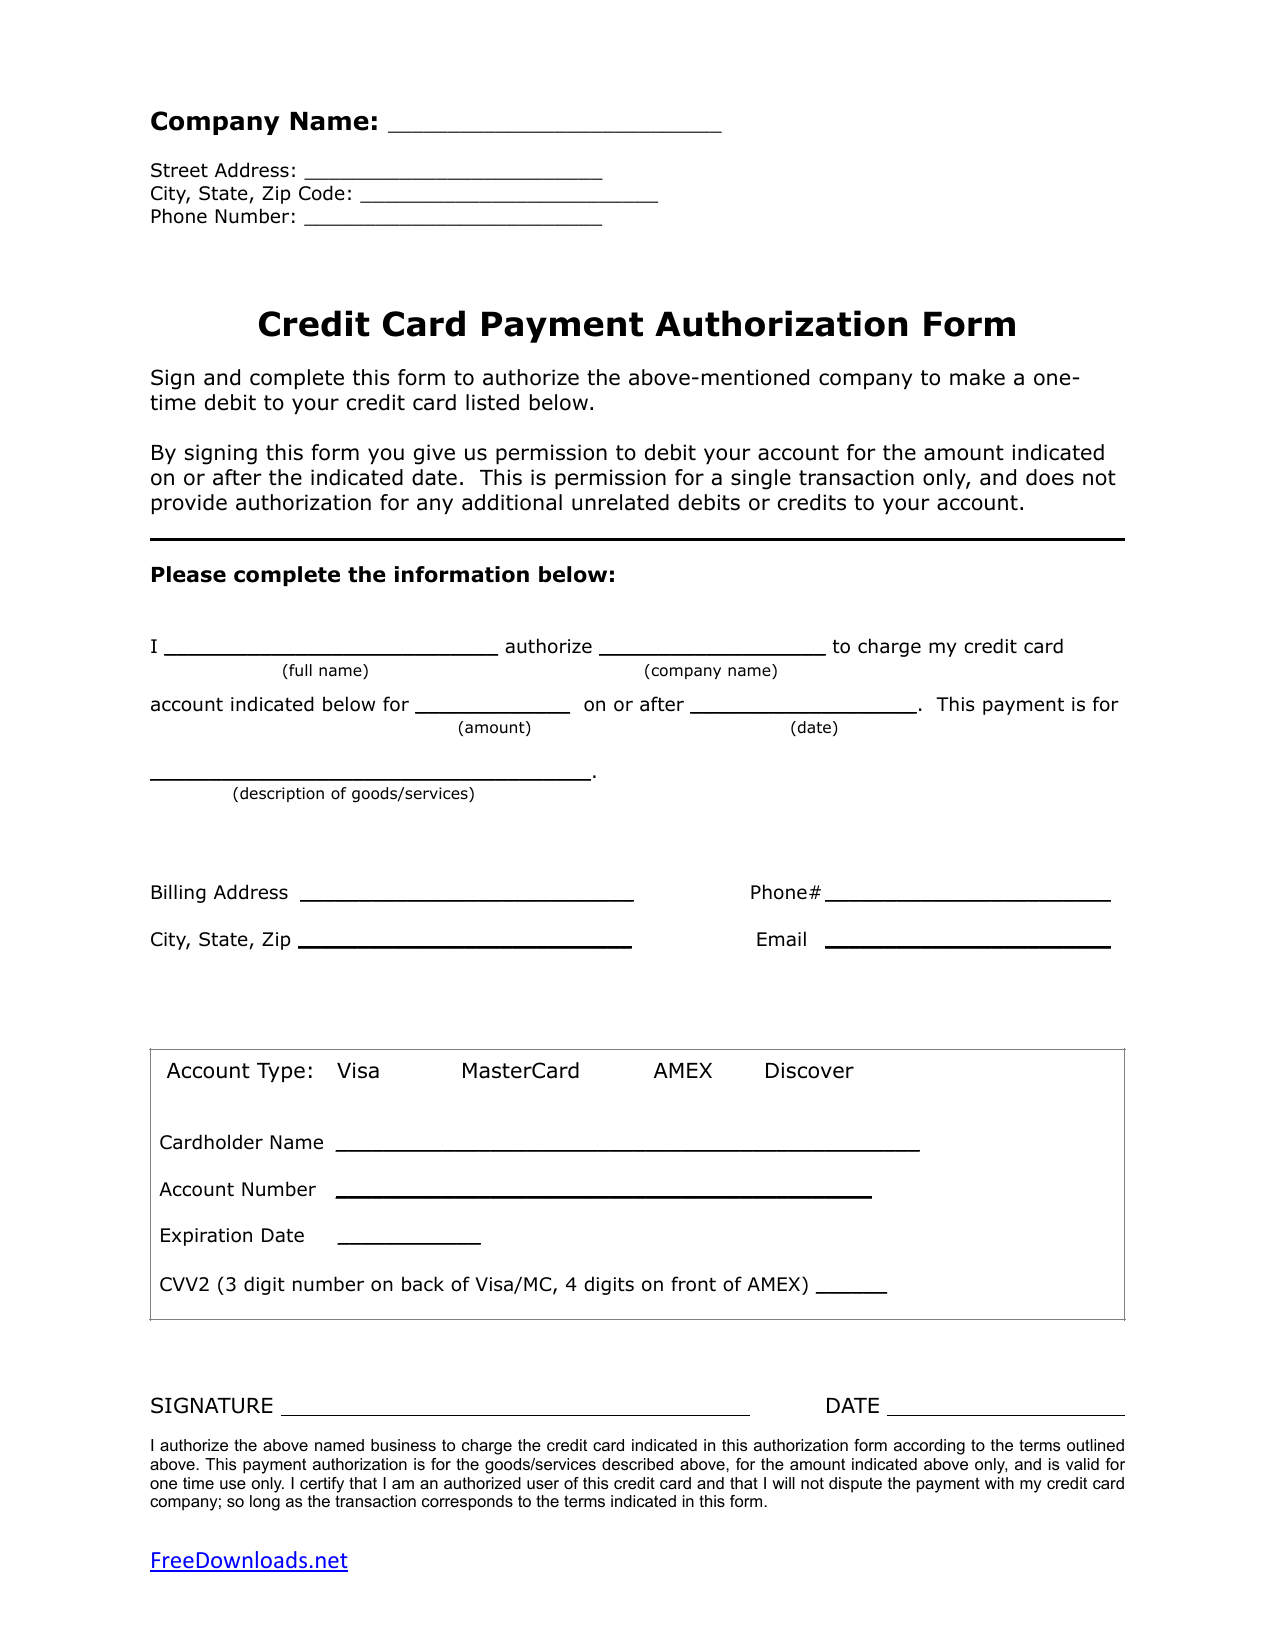 Download One (1) Time Credit Card Authorization Payment Form With Credit Card Authorization Form Template Word